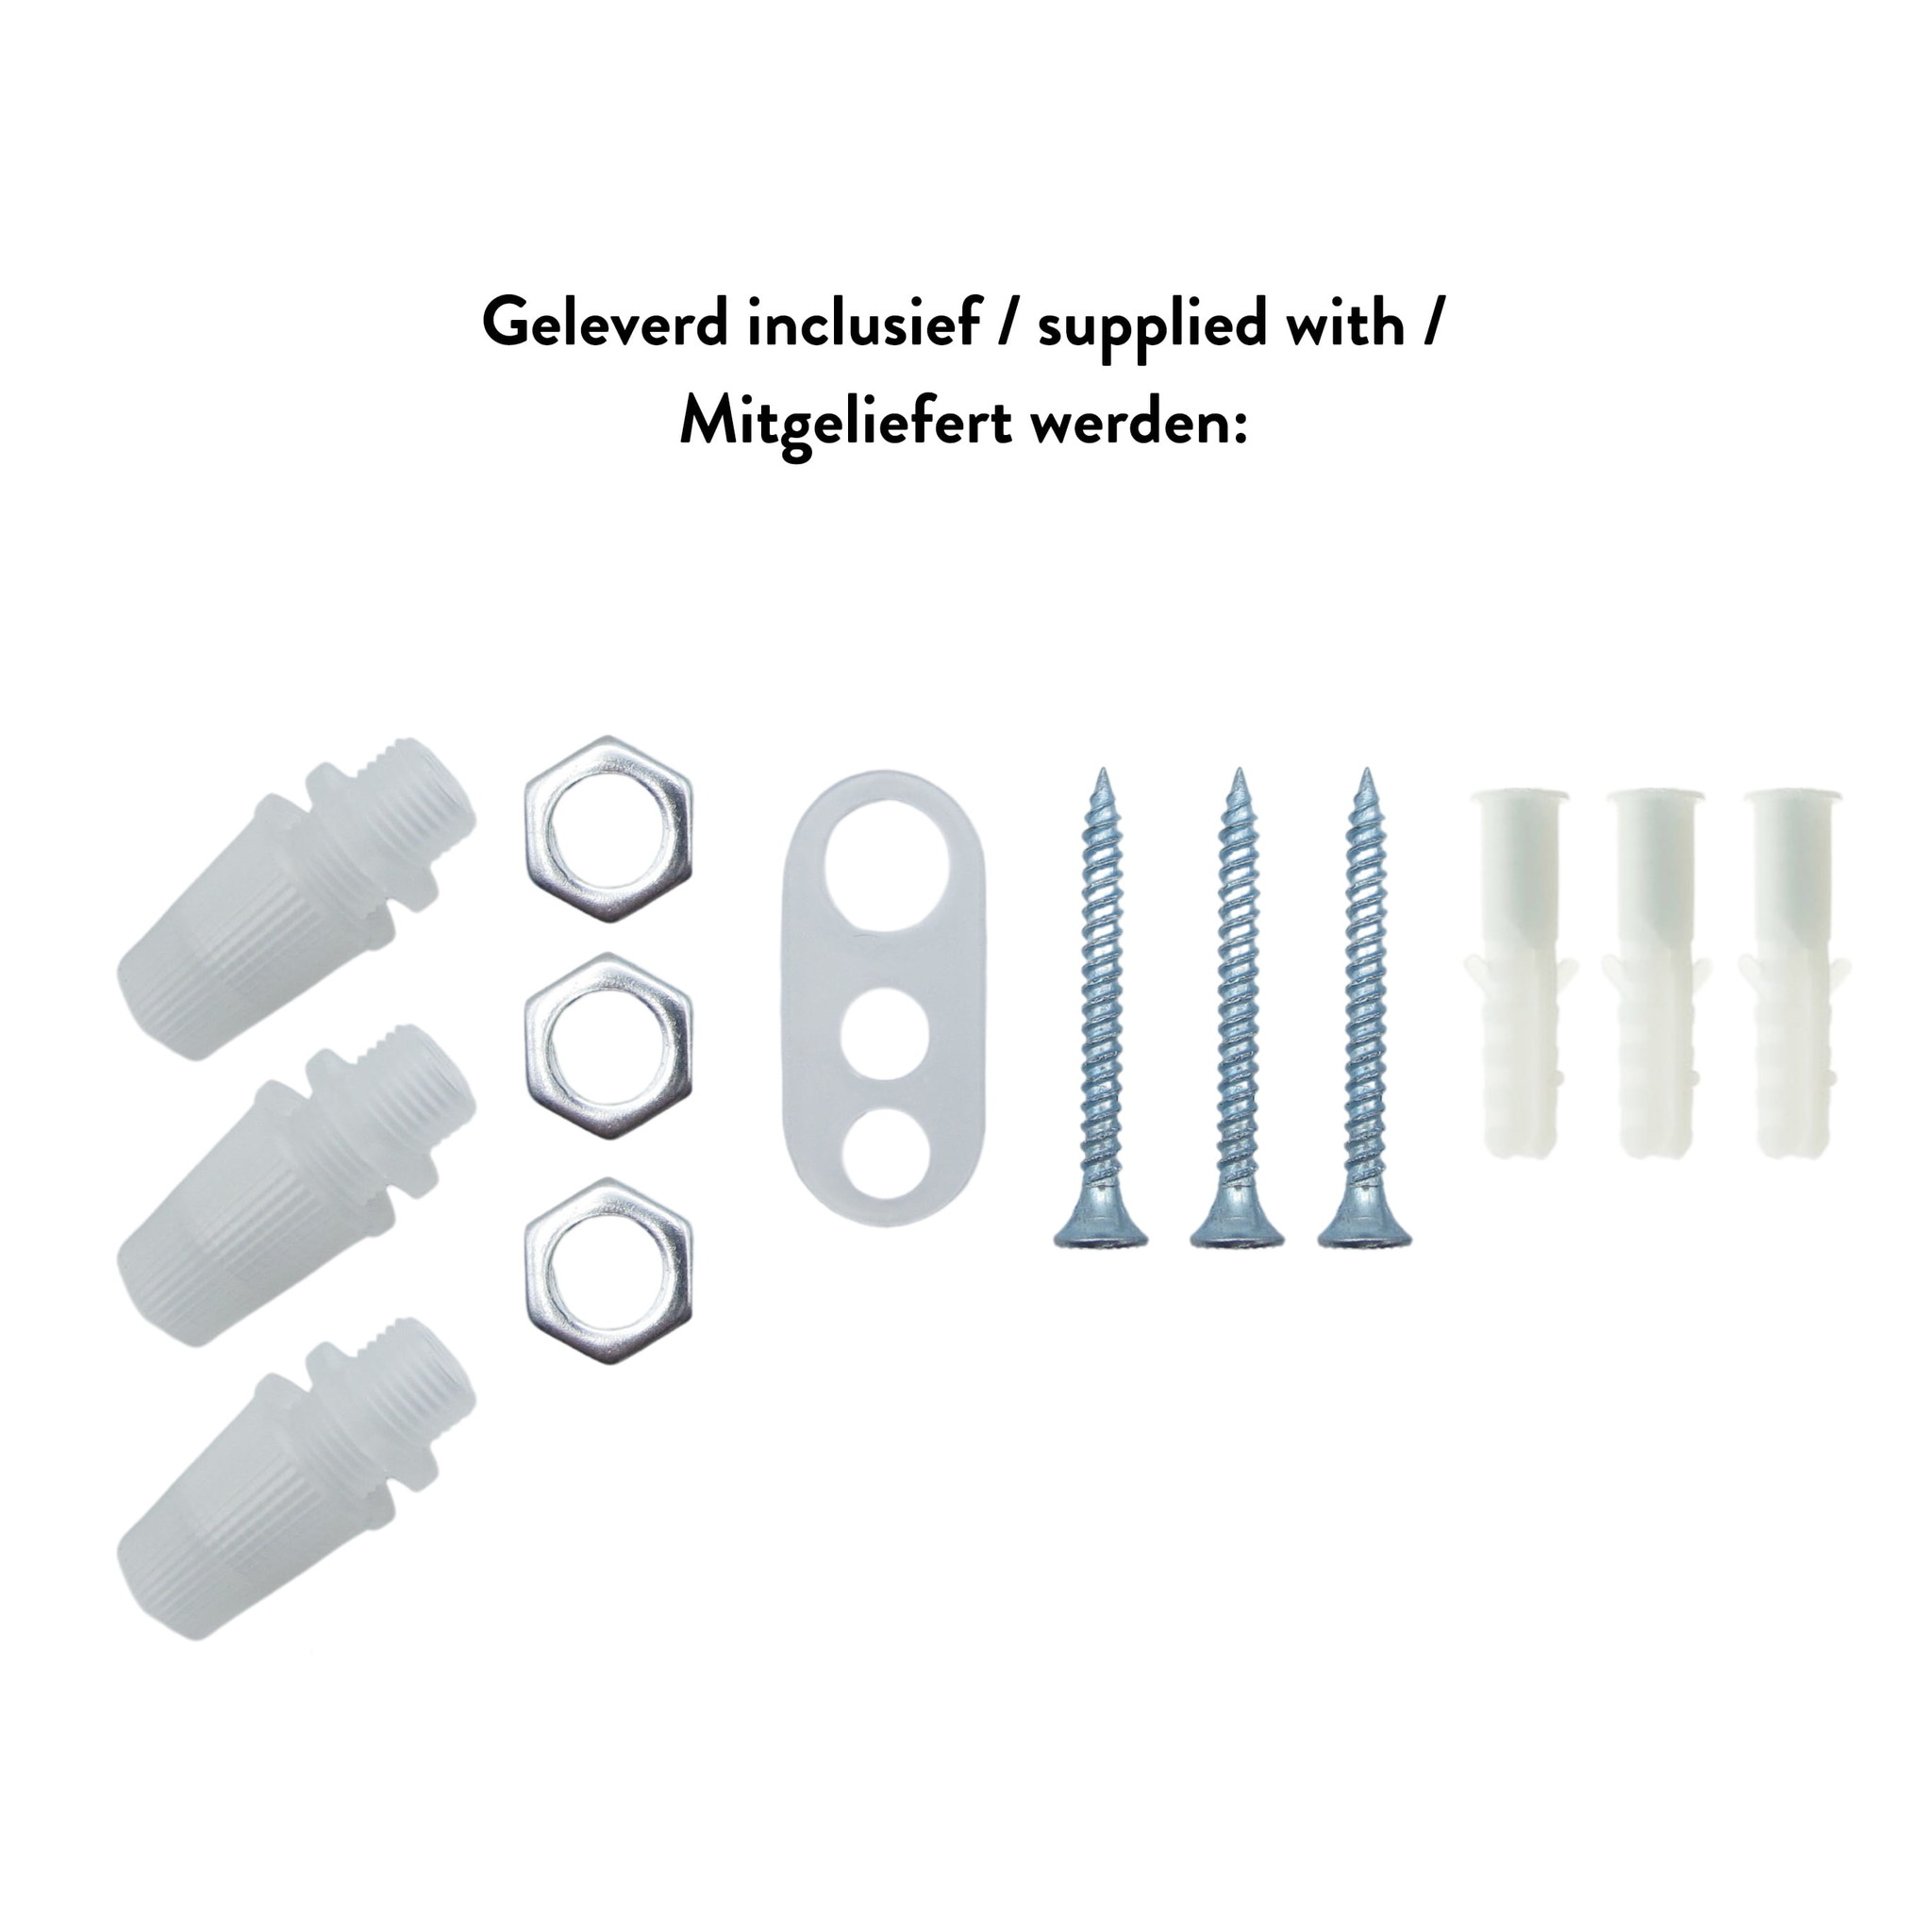 WAGO connector kit compatible with 3x cable for 2 hole ceiling rose